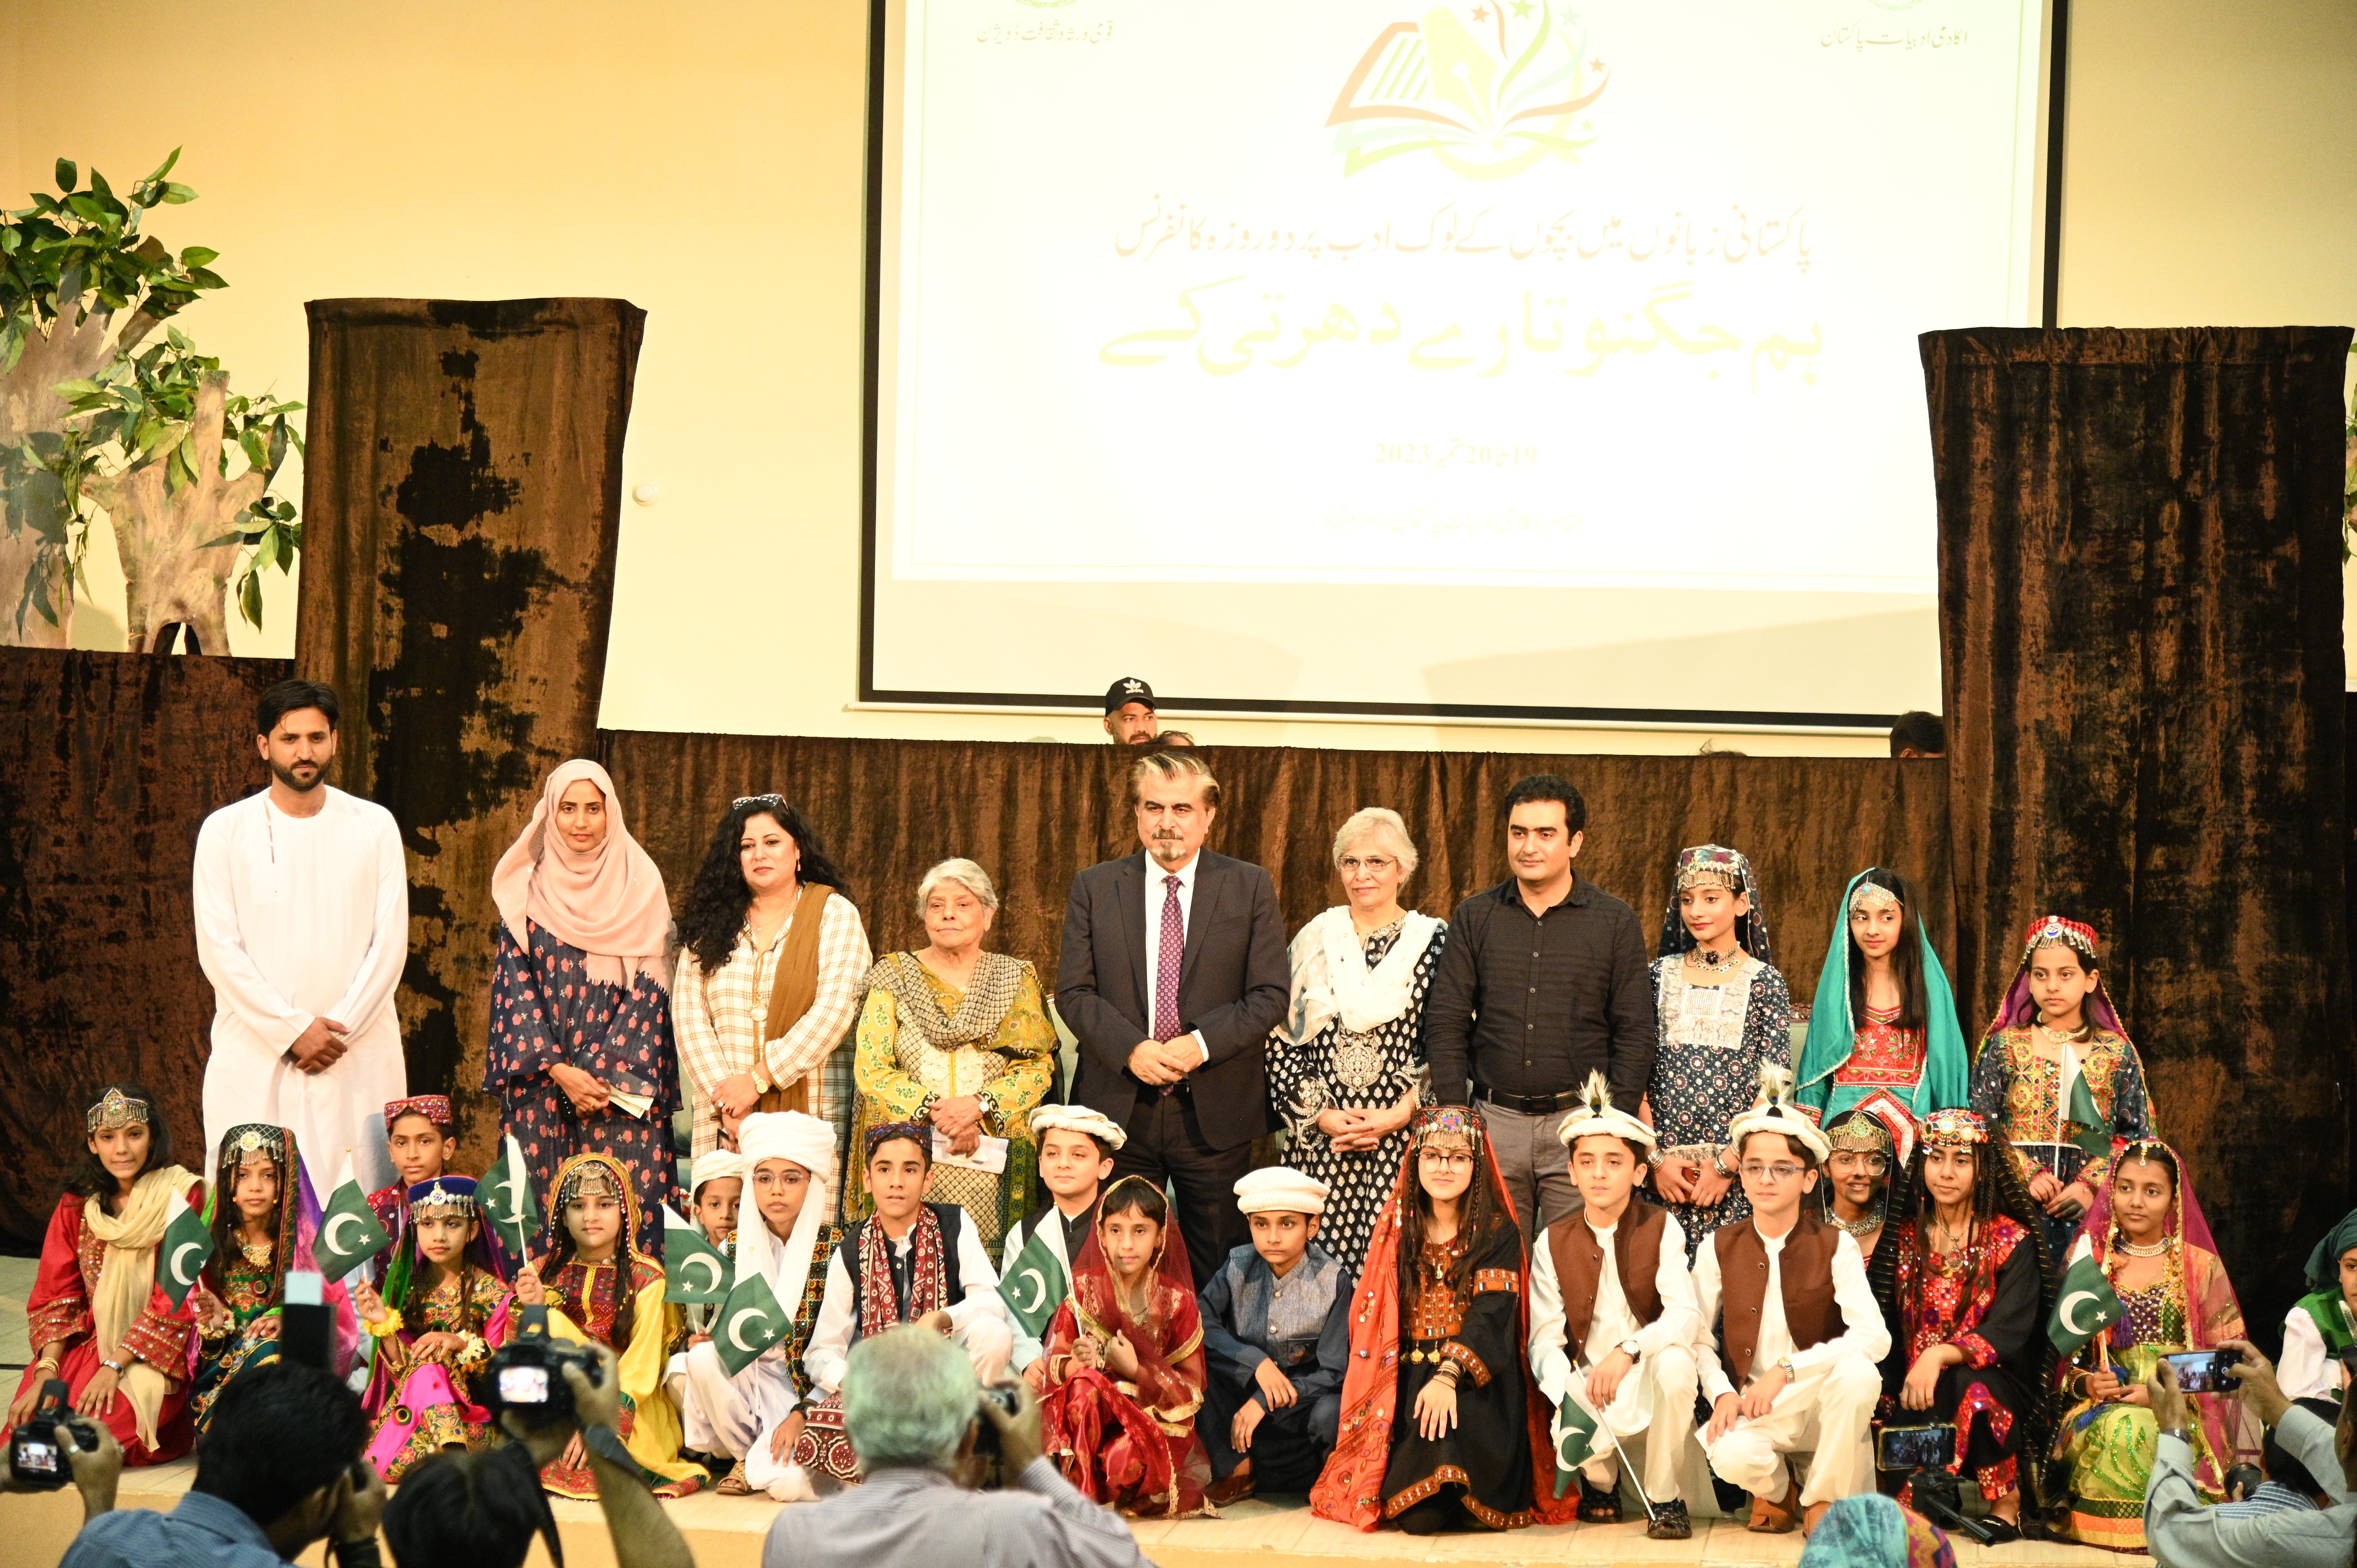 A group photo of participants presenting different cultures of pakistan with Jamal Shah